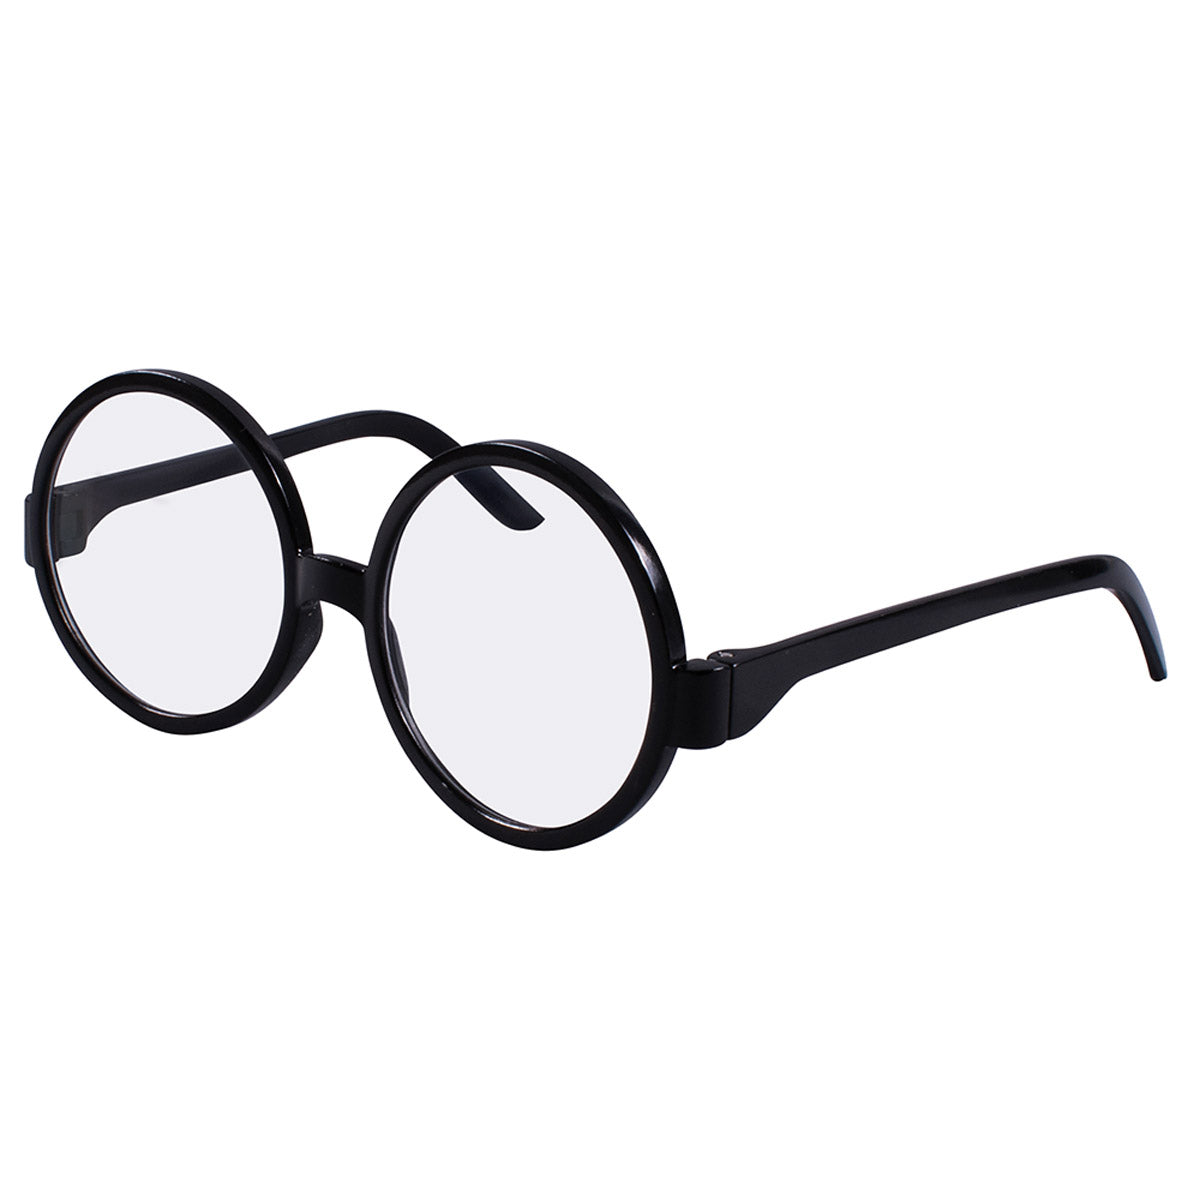 Harry Potter Glasses Disguise 107789